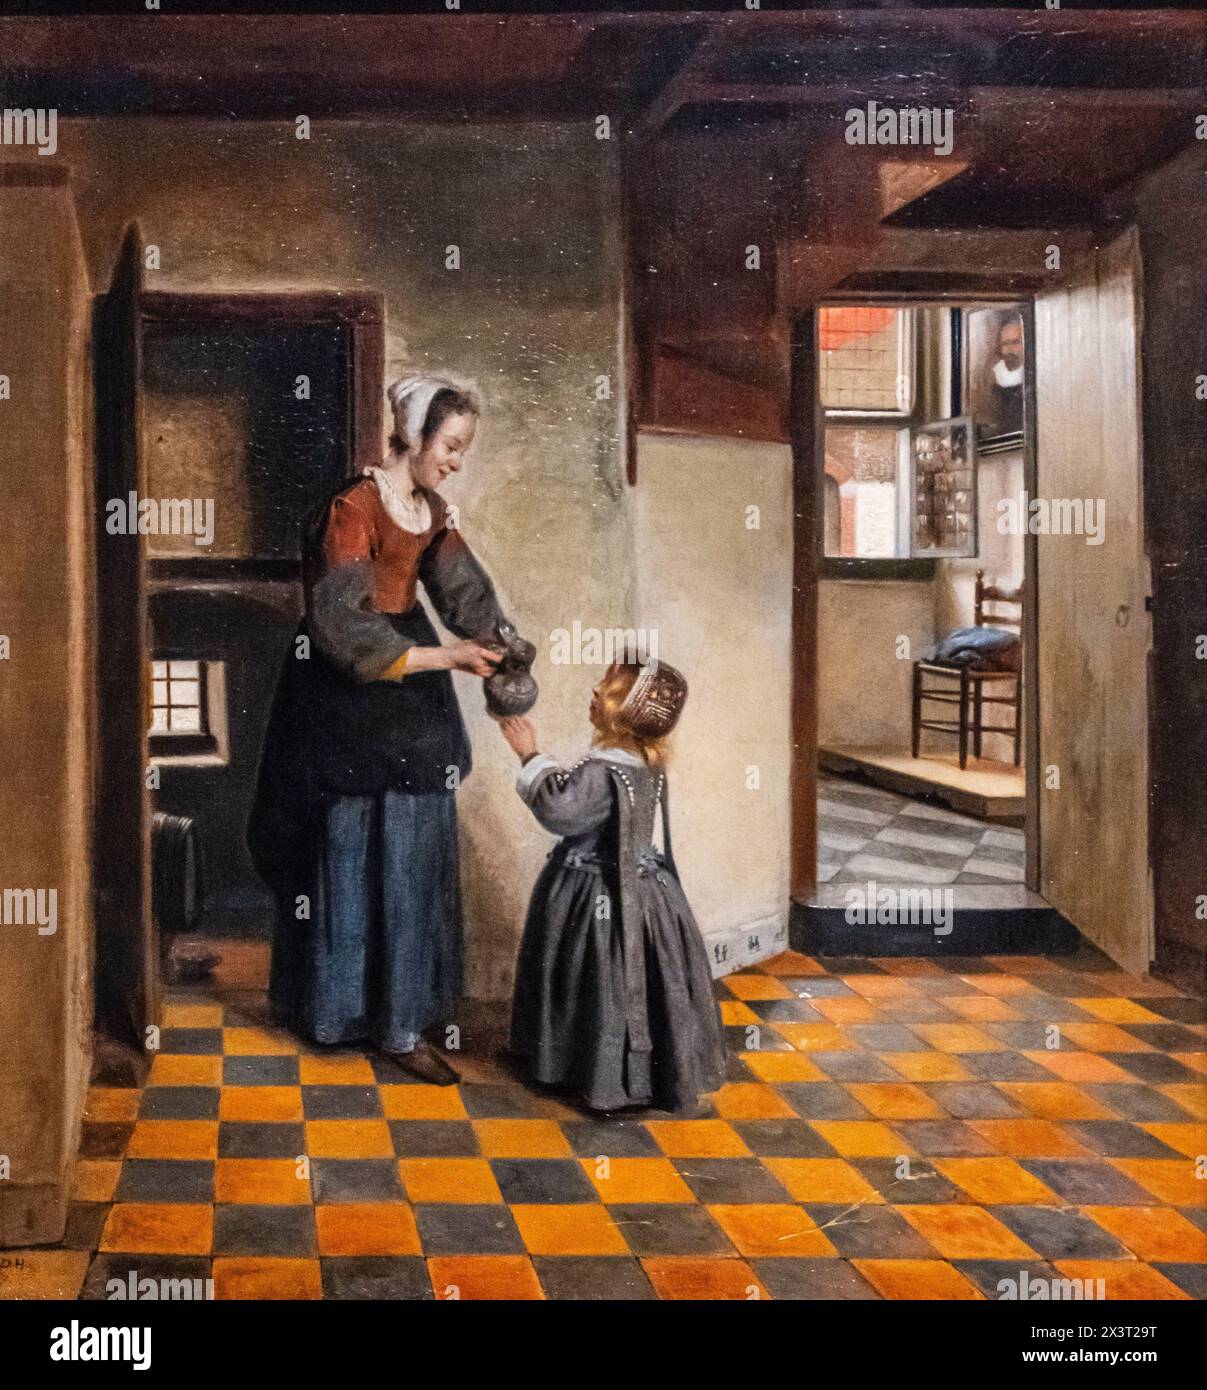 A Maid with a Child in a Pantry, Pieter de Hooch, huile sur toile, c.1656-1660, Amsterdam, pays-Bas Banque D'Images